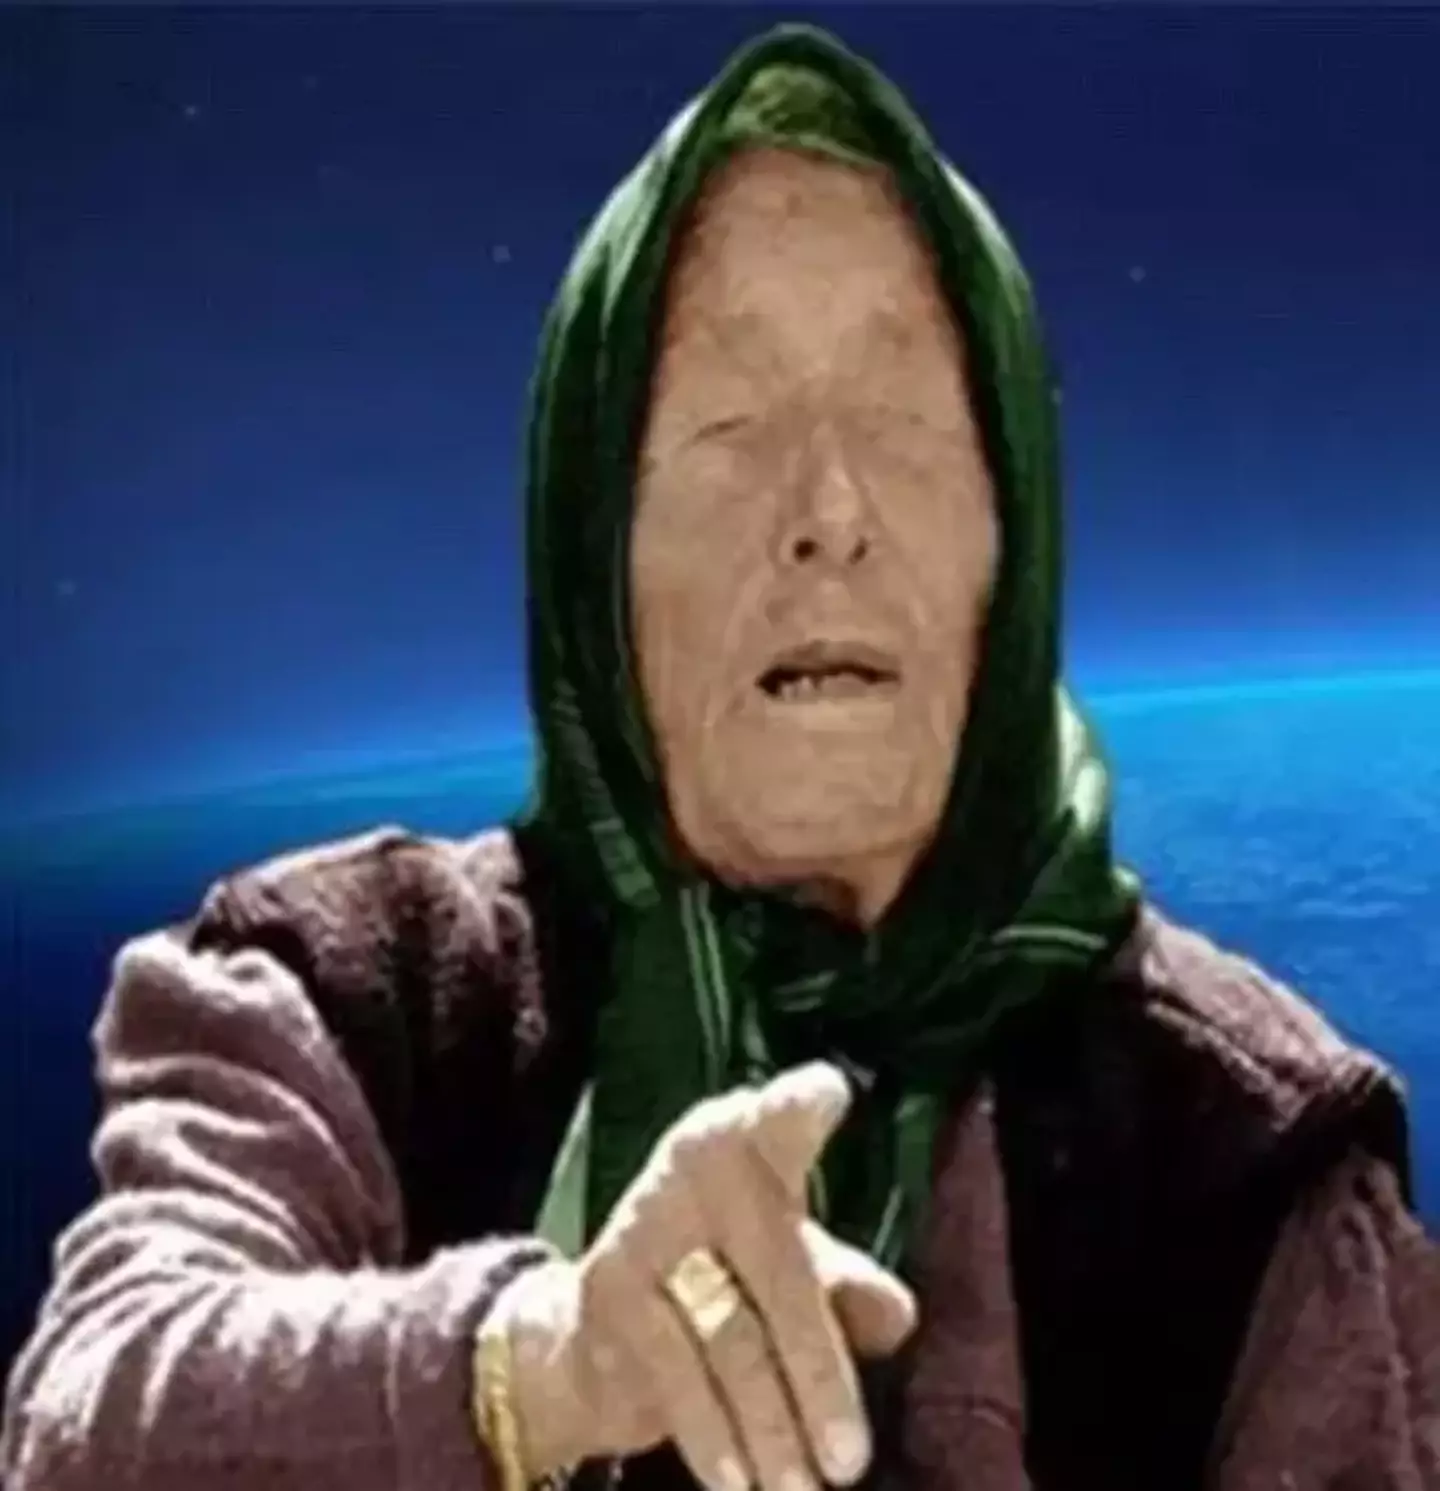 Baba Vanga died in 1996 but left behind plenty of predictions, some of which were eerily accurate.